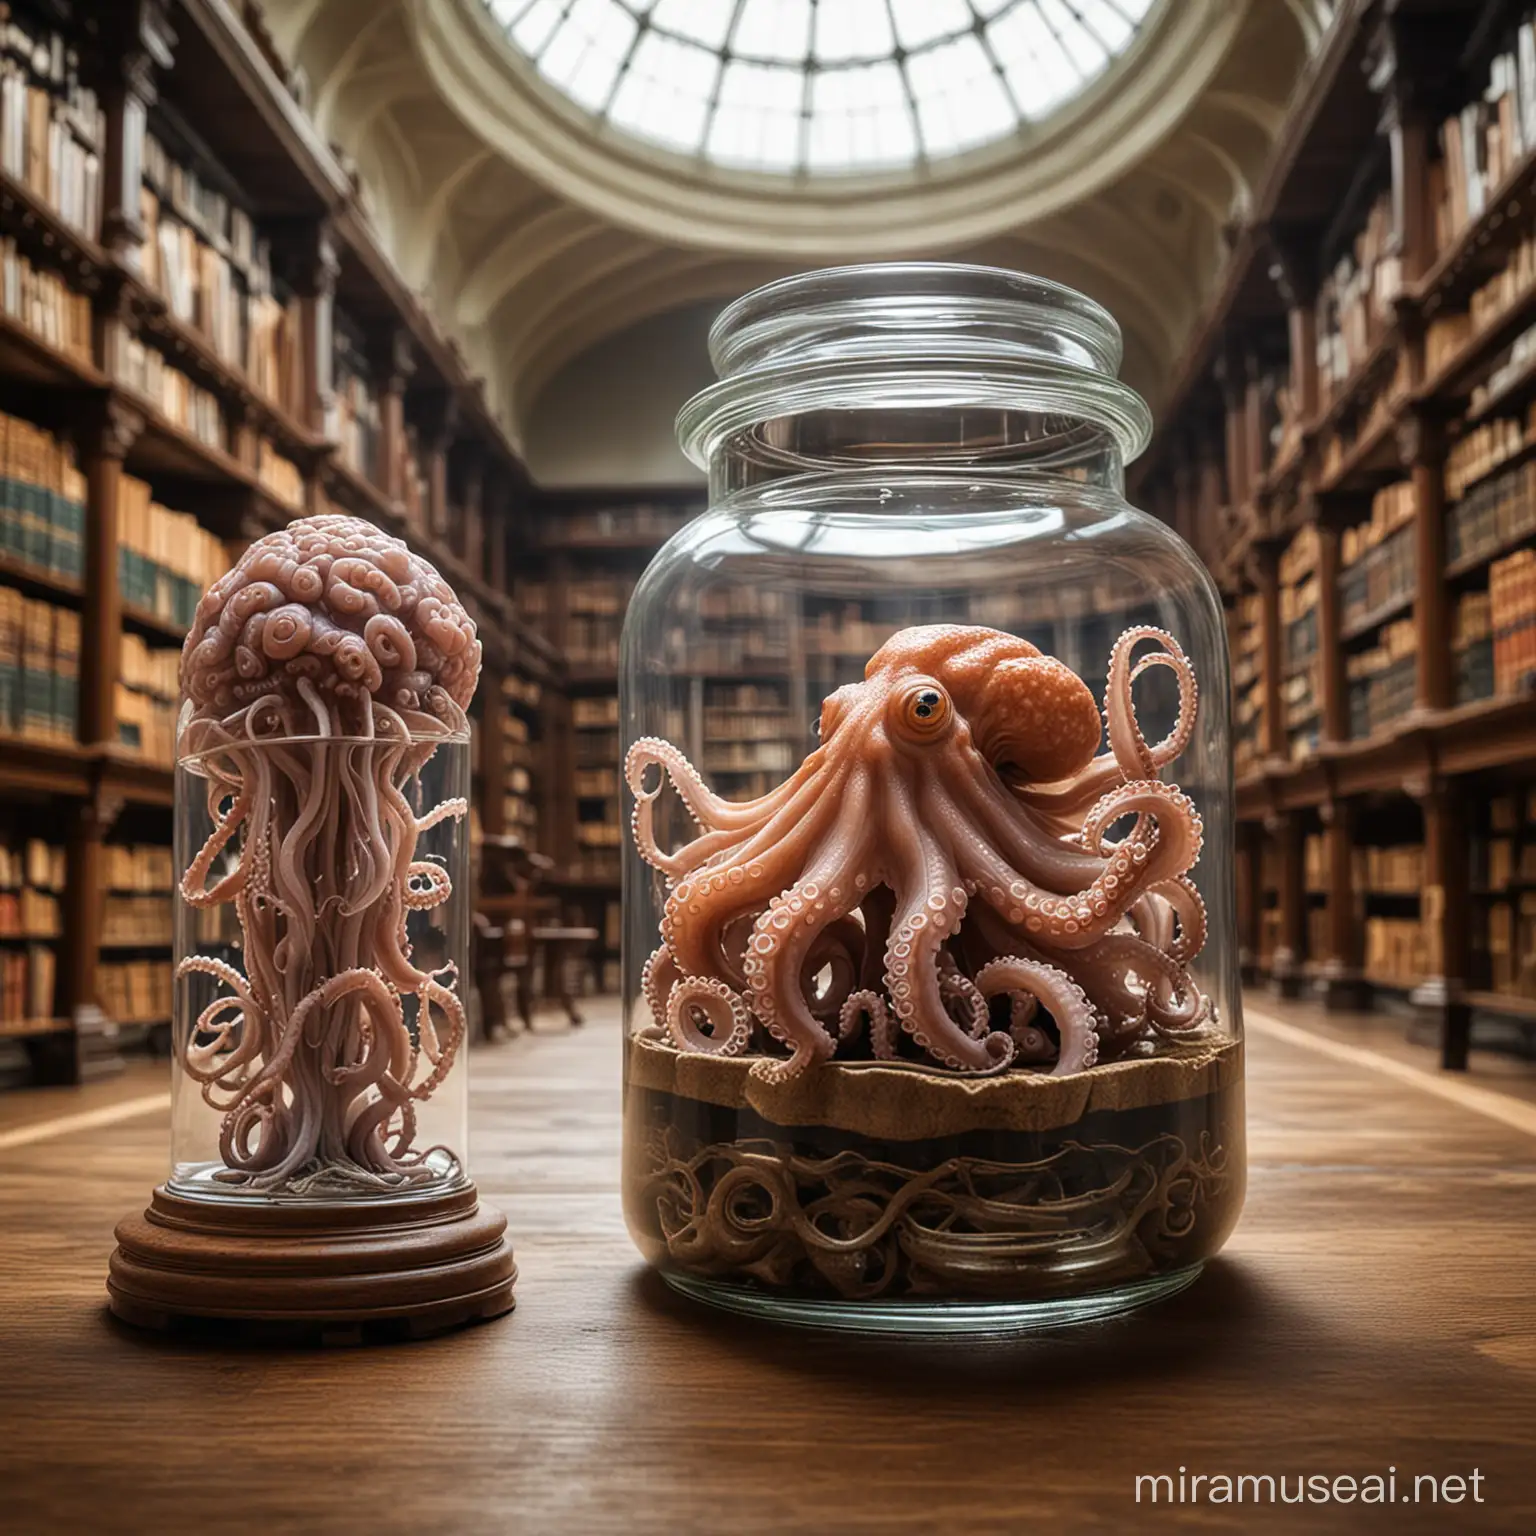 Octopus Scholar in an Elegant Library with a Brain Jar Display